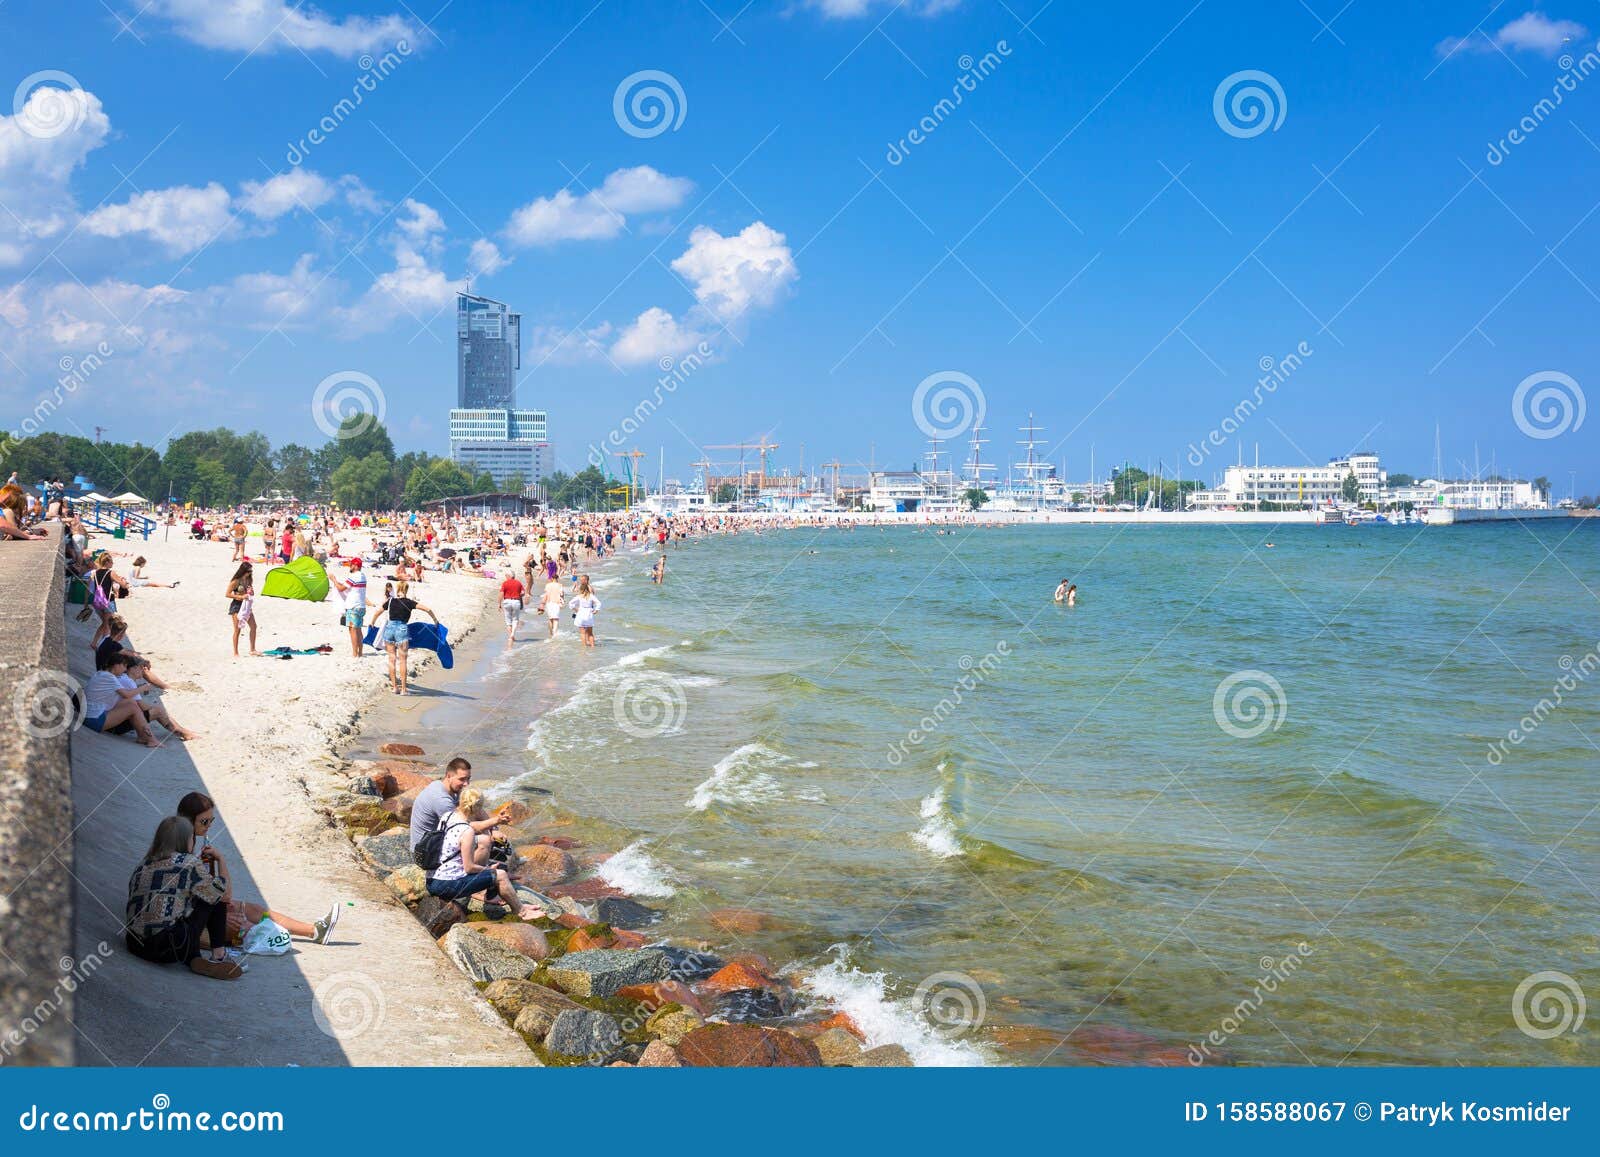 Gdynia, Poland - June 8, 2019: People on the Beach at Baltic Sea in ...